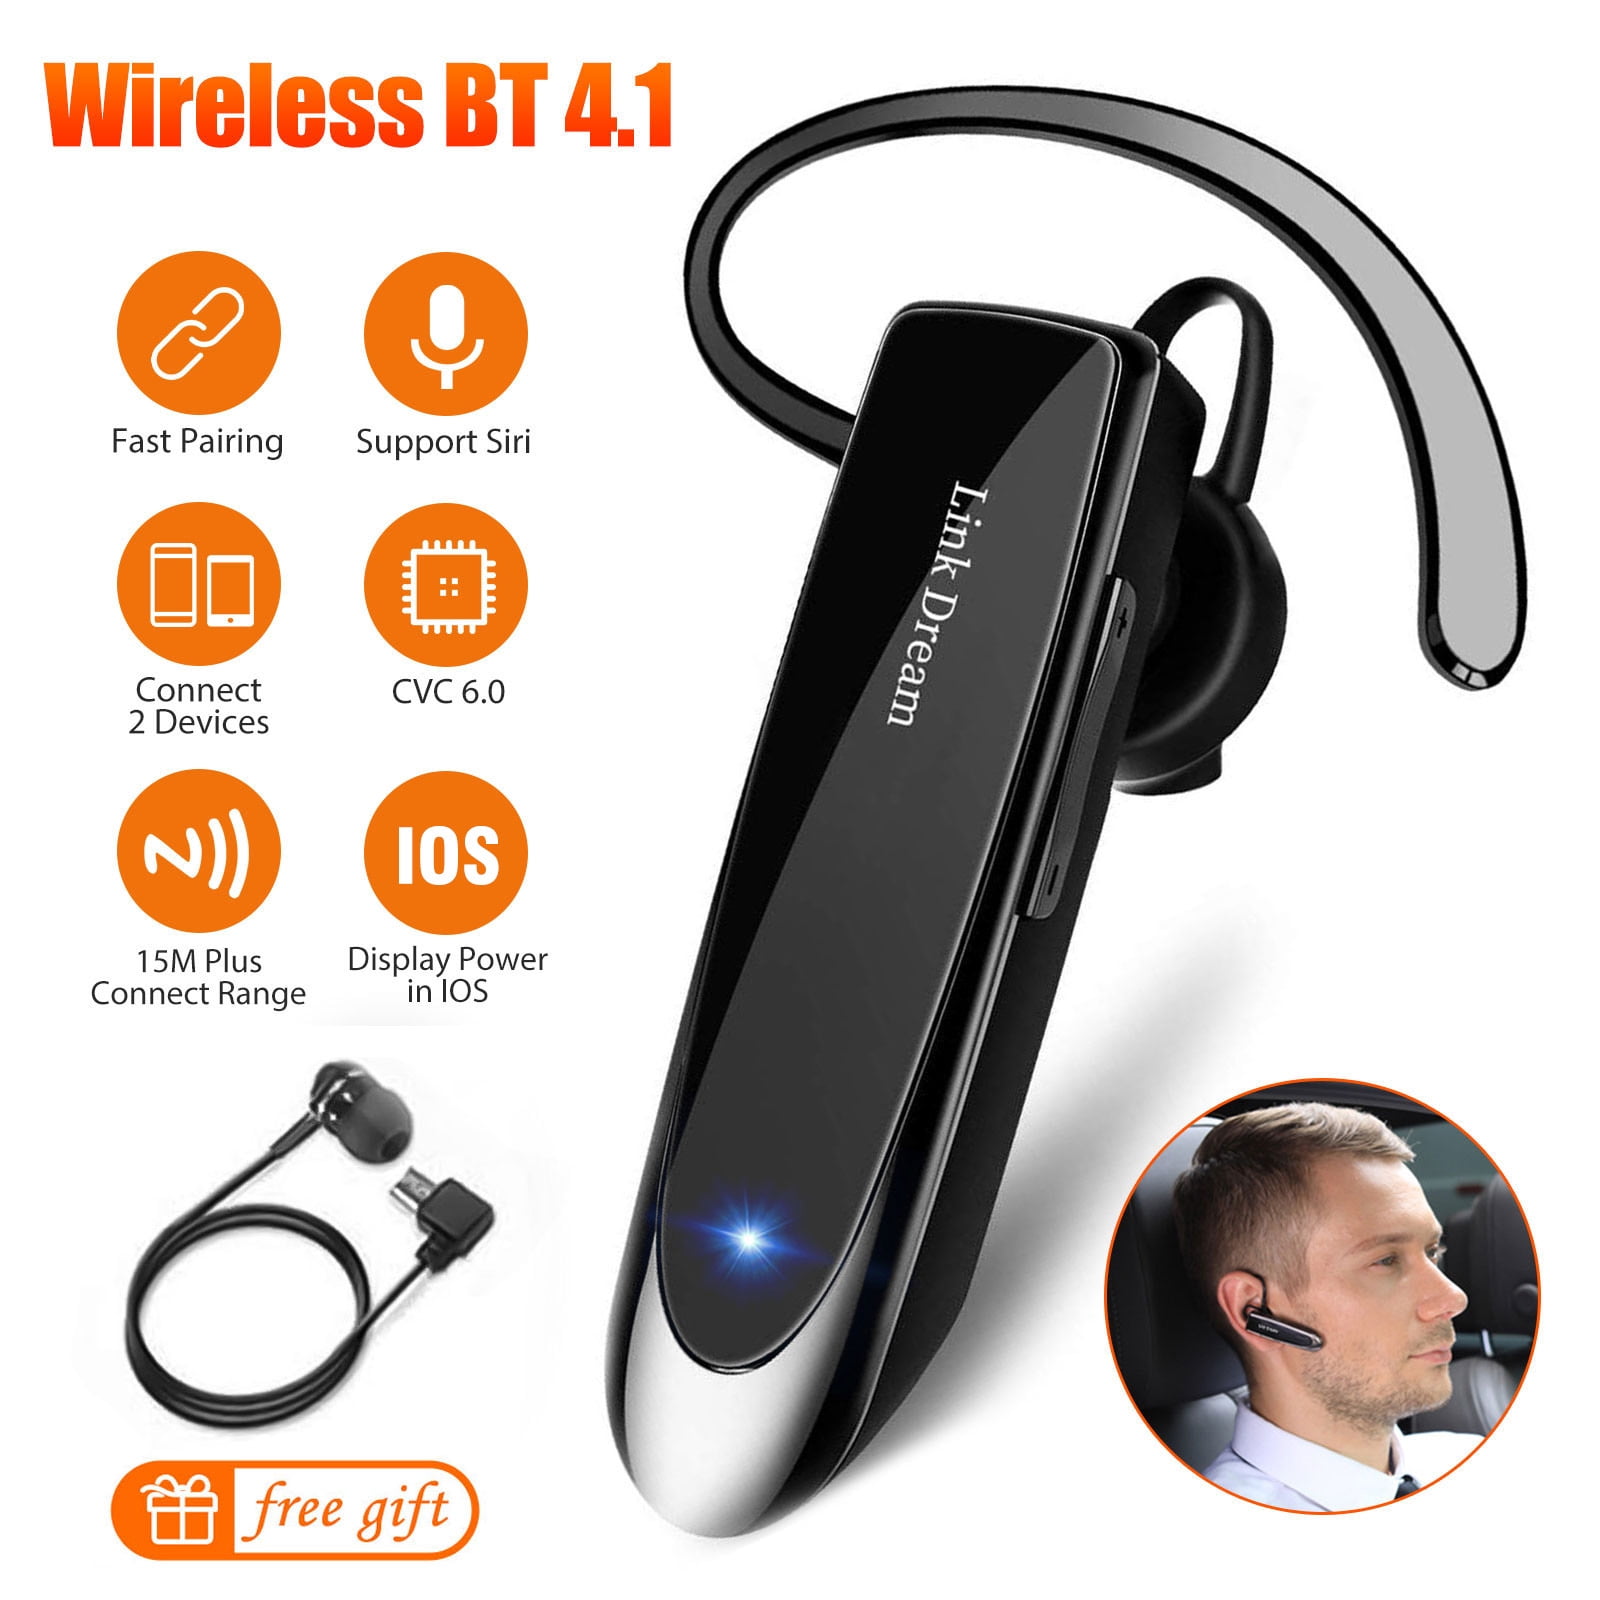 EEEKit Bluetooth Headset 24Hrs Playtime Wireless Bluetooth V4.1 Earpiece CVC 6.0 Noise Canceling Headphone Car Trucker Business Earbud with Mic Compatible with iPhone Samsung Android